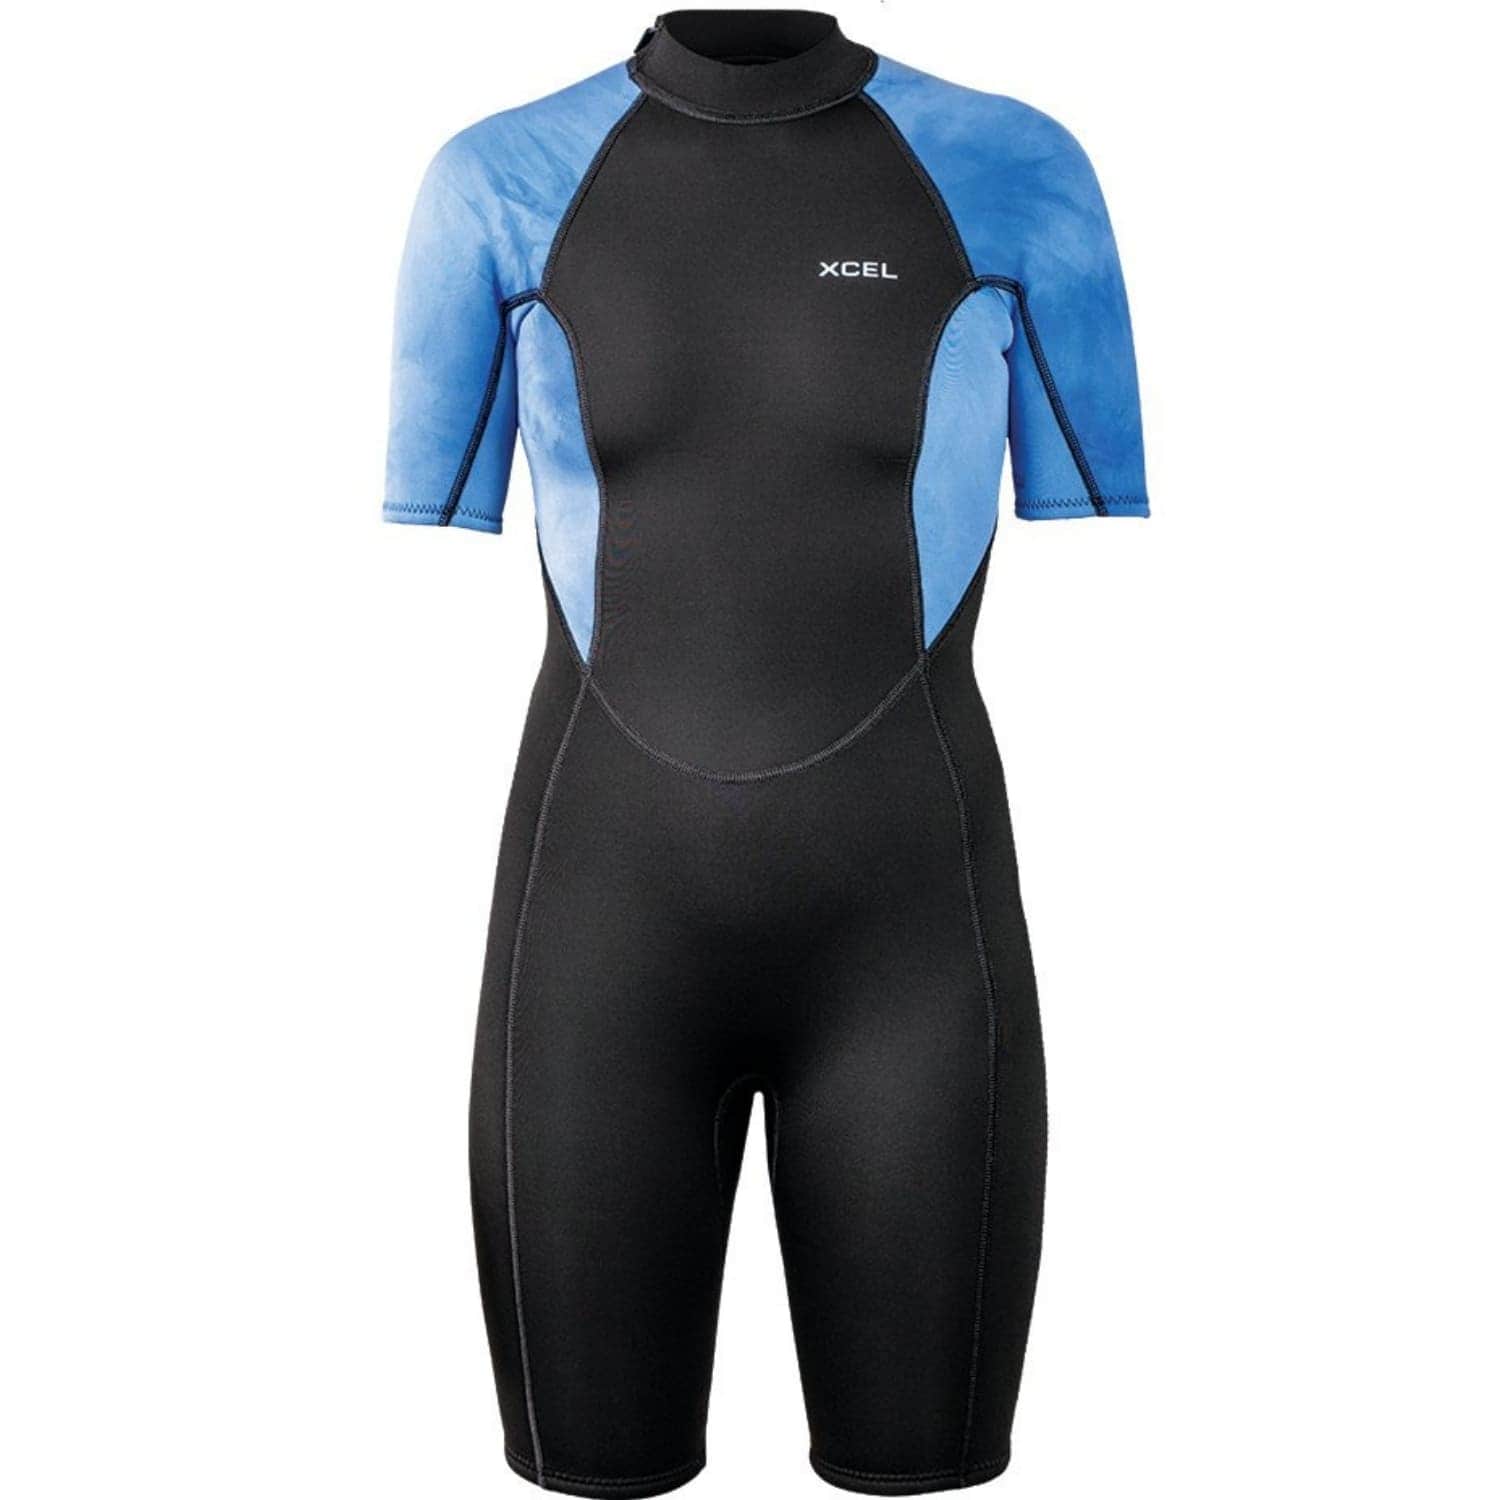 Xcel Womens 2mm Axis Spring Shorty Wetsuit - Graphite/Tie Dye